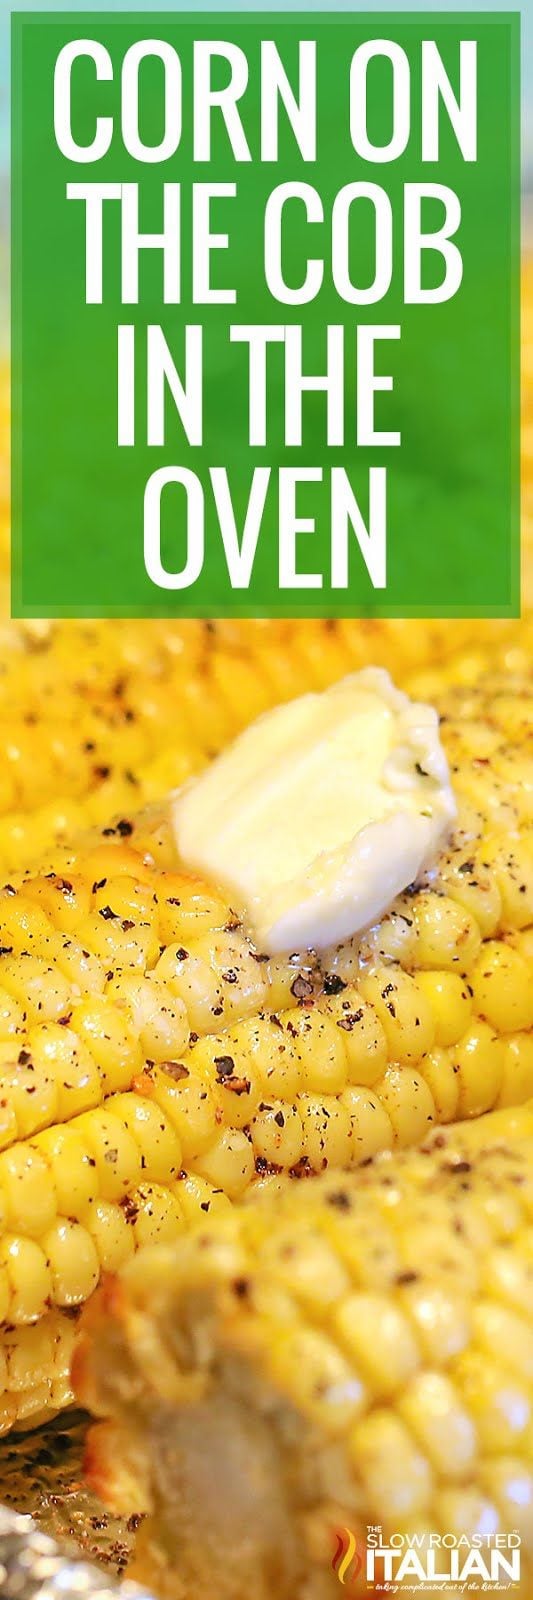 titled image (and shown): corn on the cob in the oven